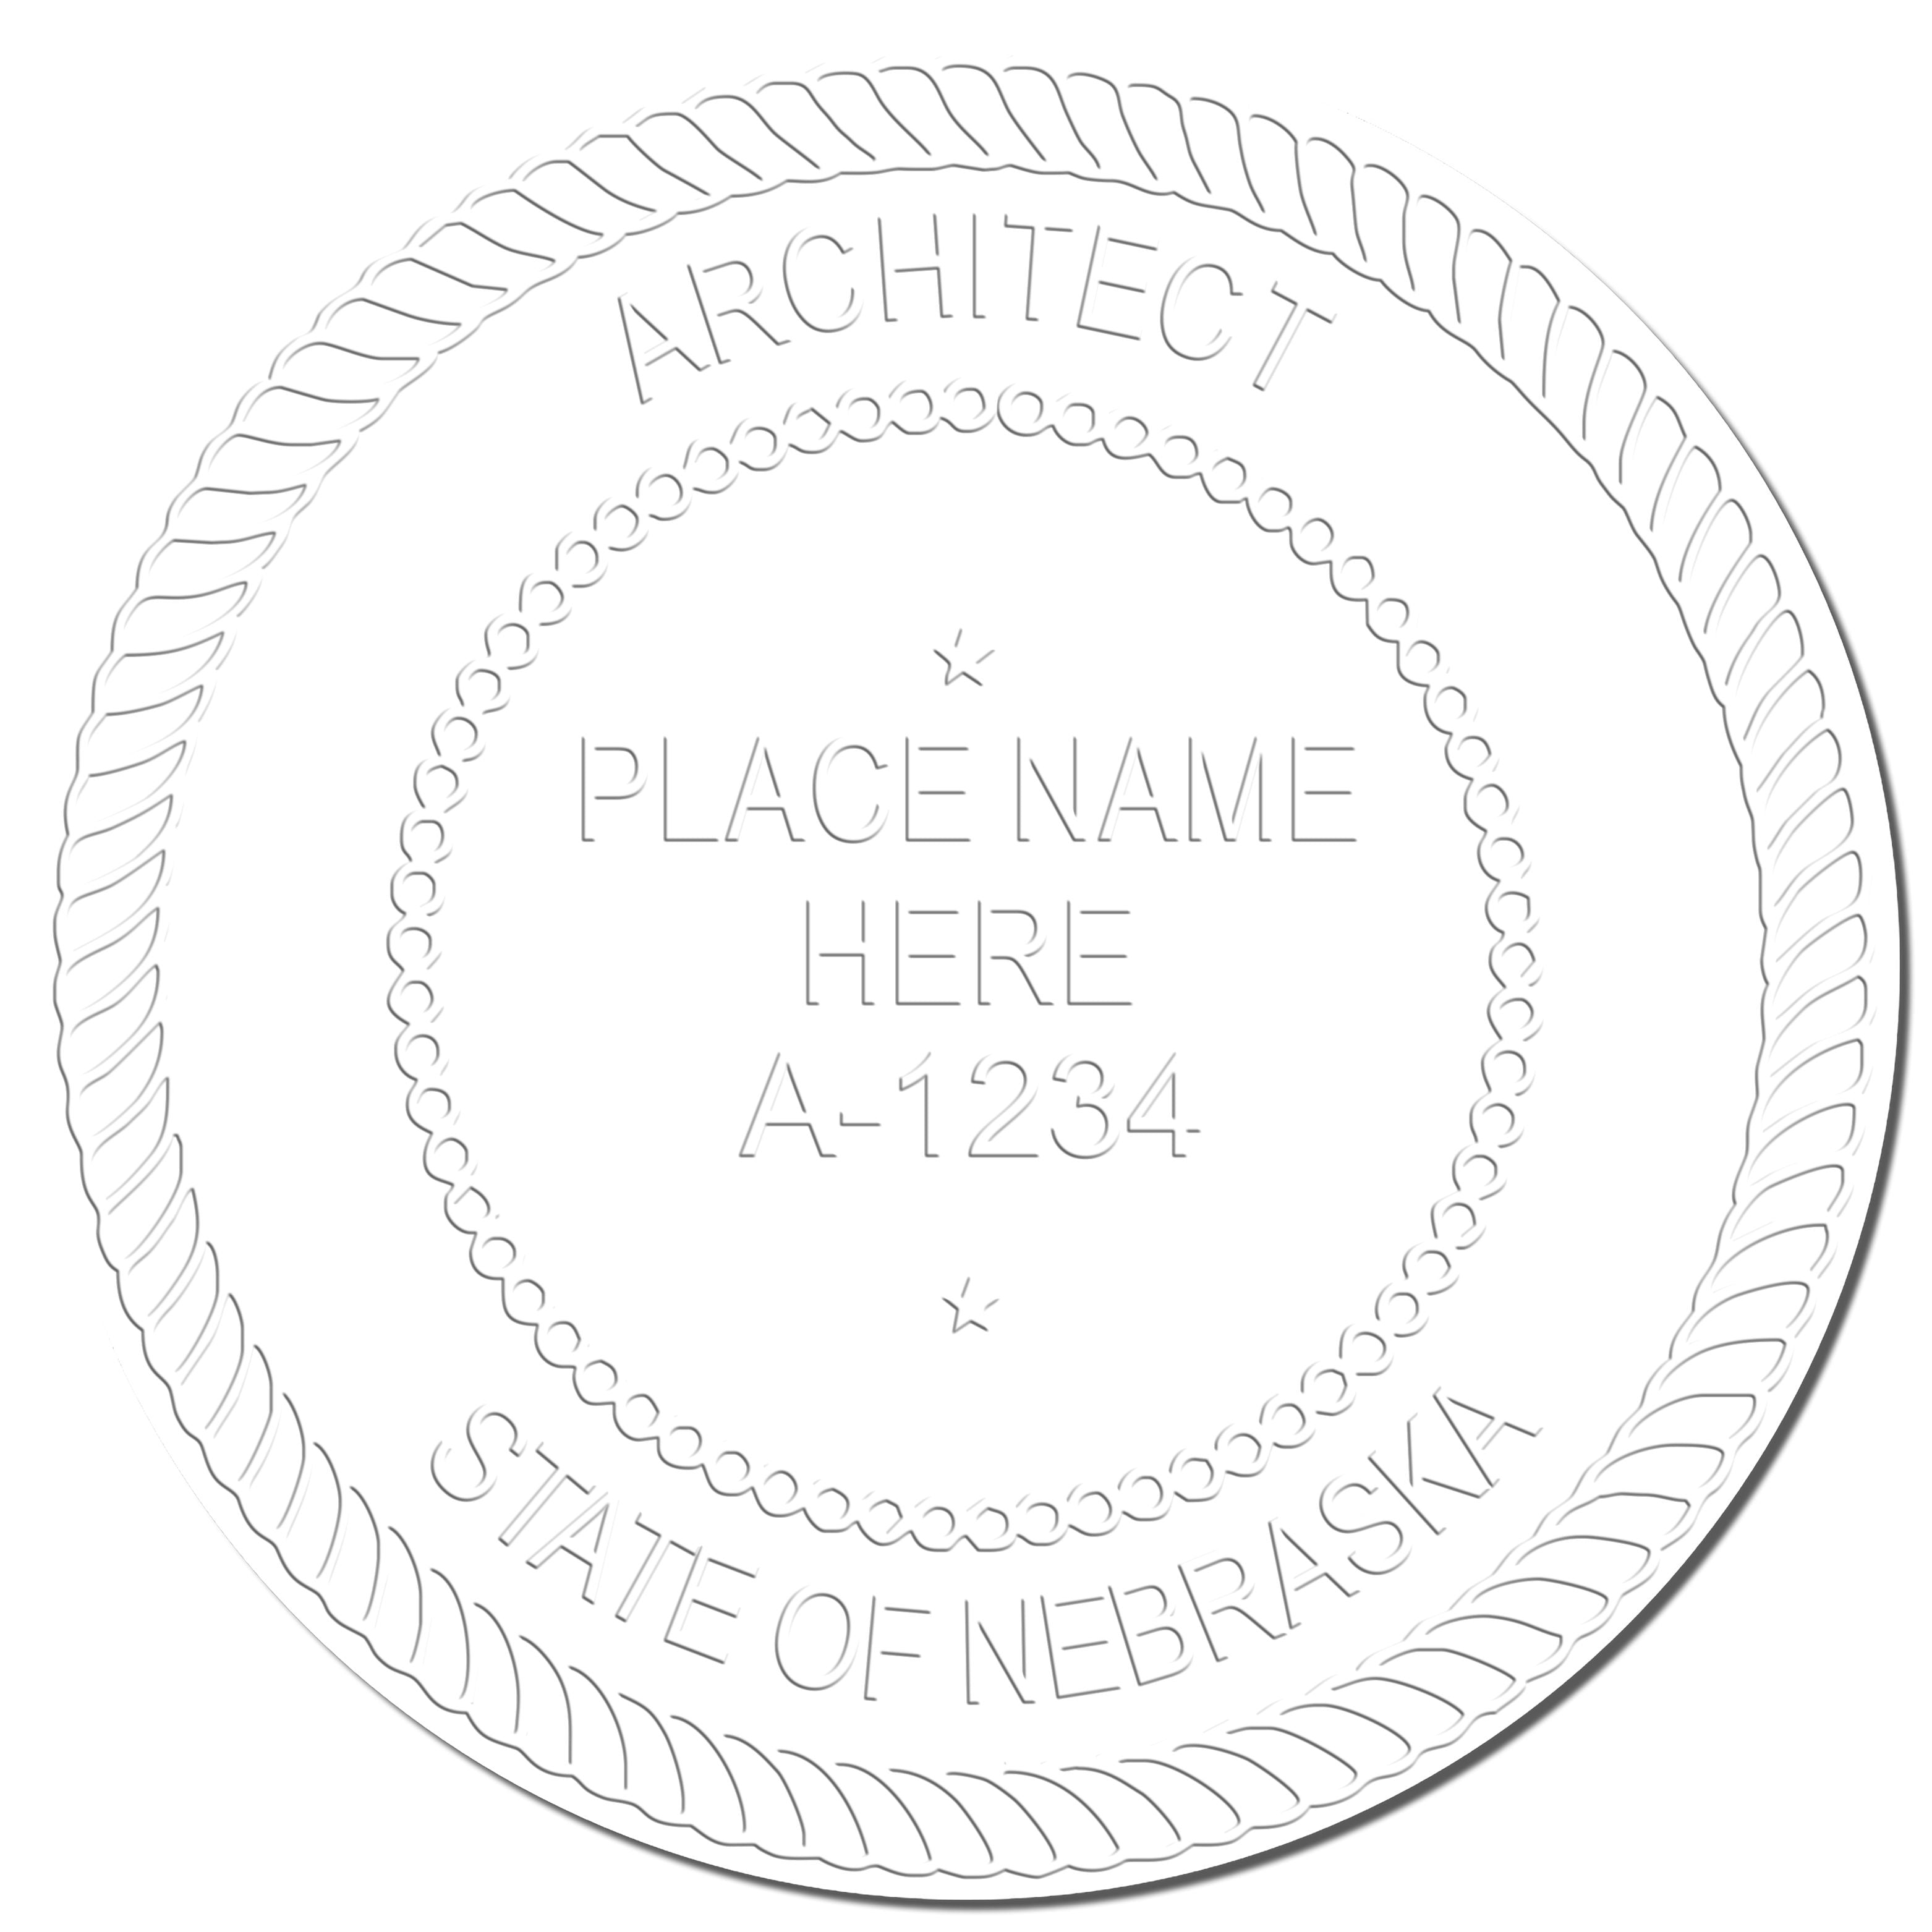 A stamped impression of the State of Nebraska Long Reach Architectural Embossing Seal in this stylish lifestyle photo, setting the tone for a unique and personalized product.